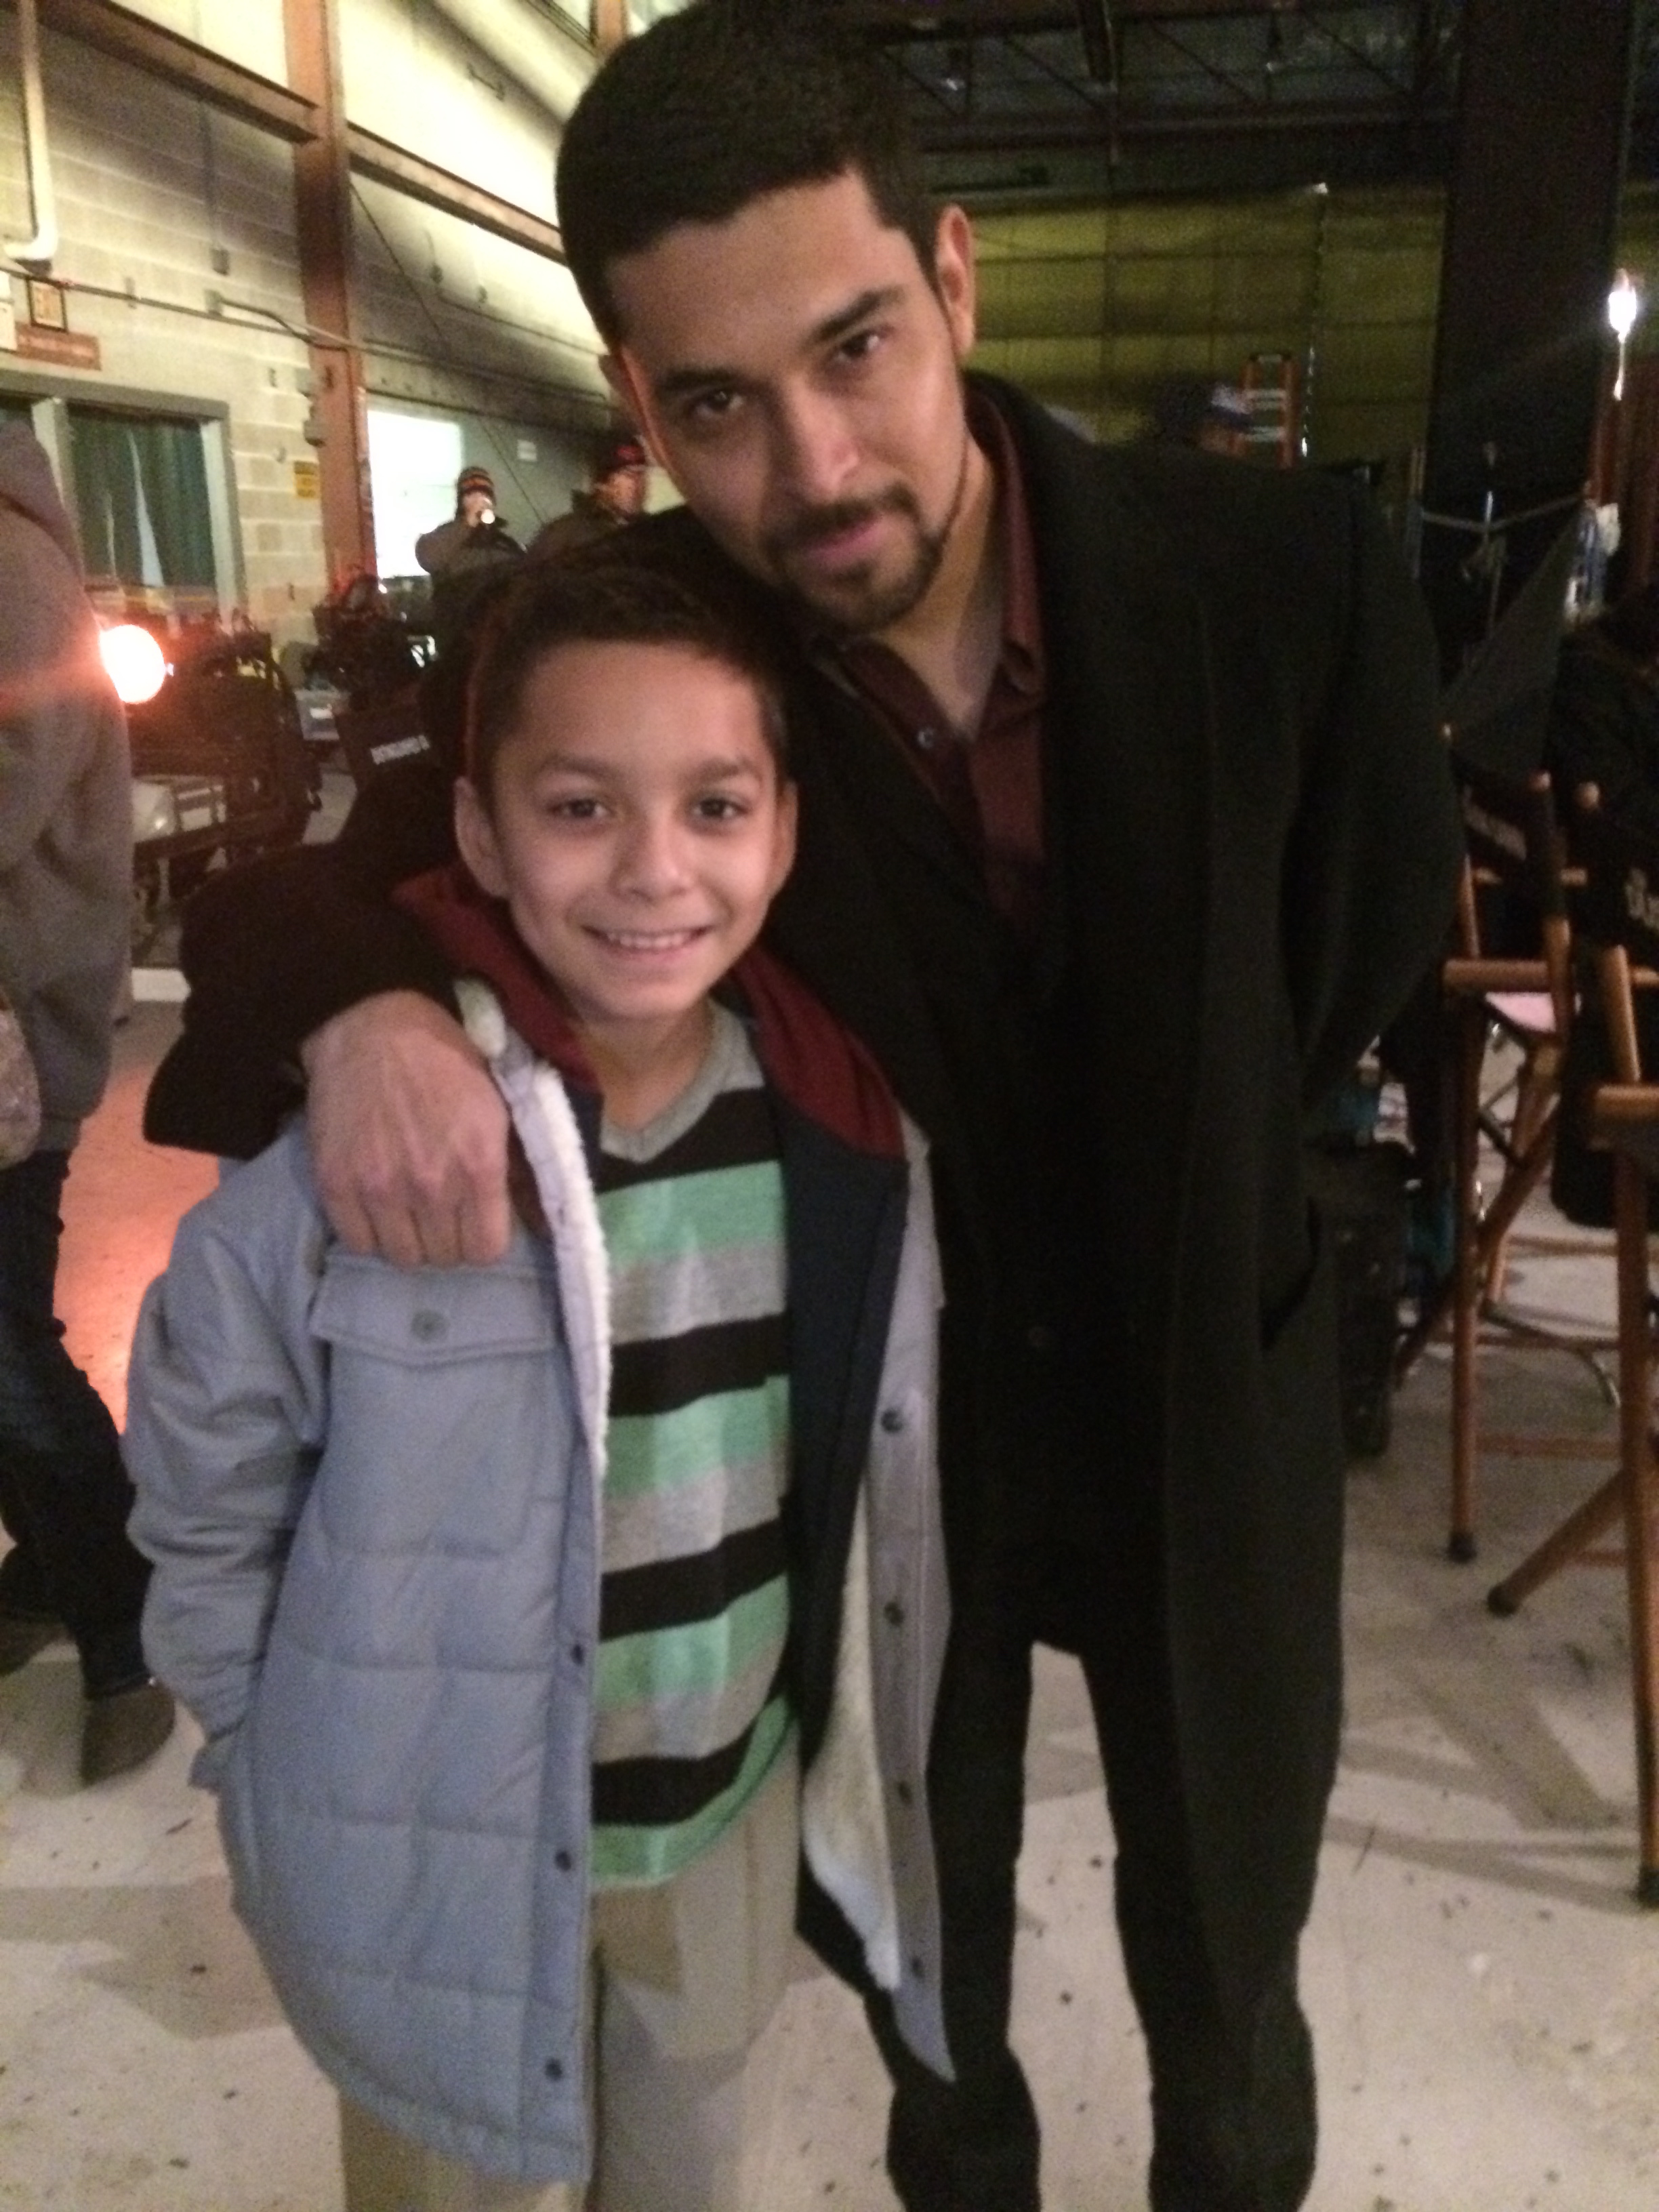 Axel Flores and Wilmer Valderrama on the set of From Dusk Till Dawn.